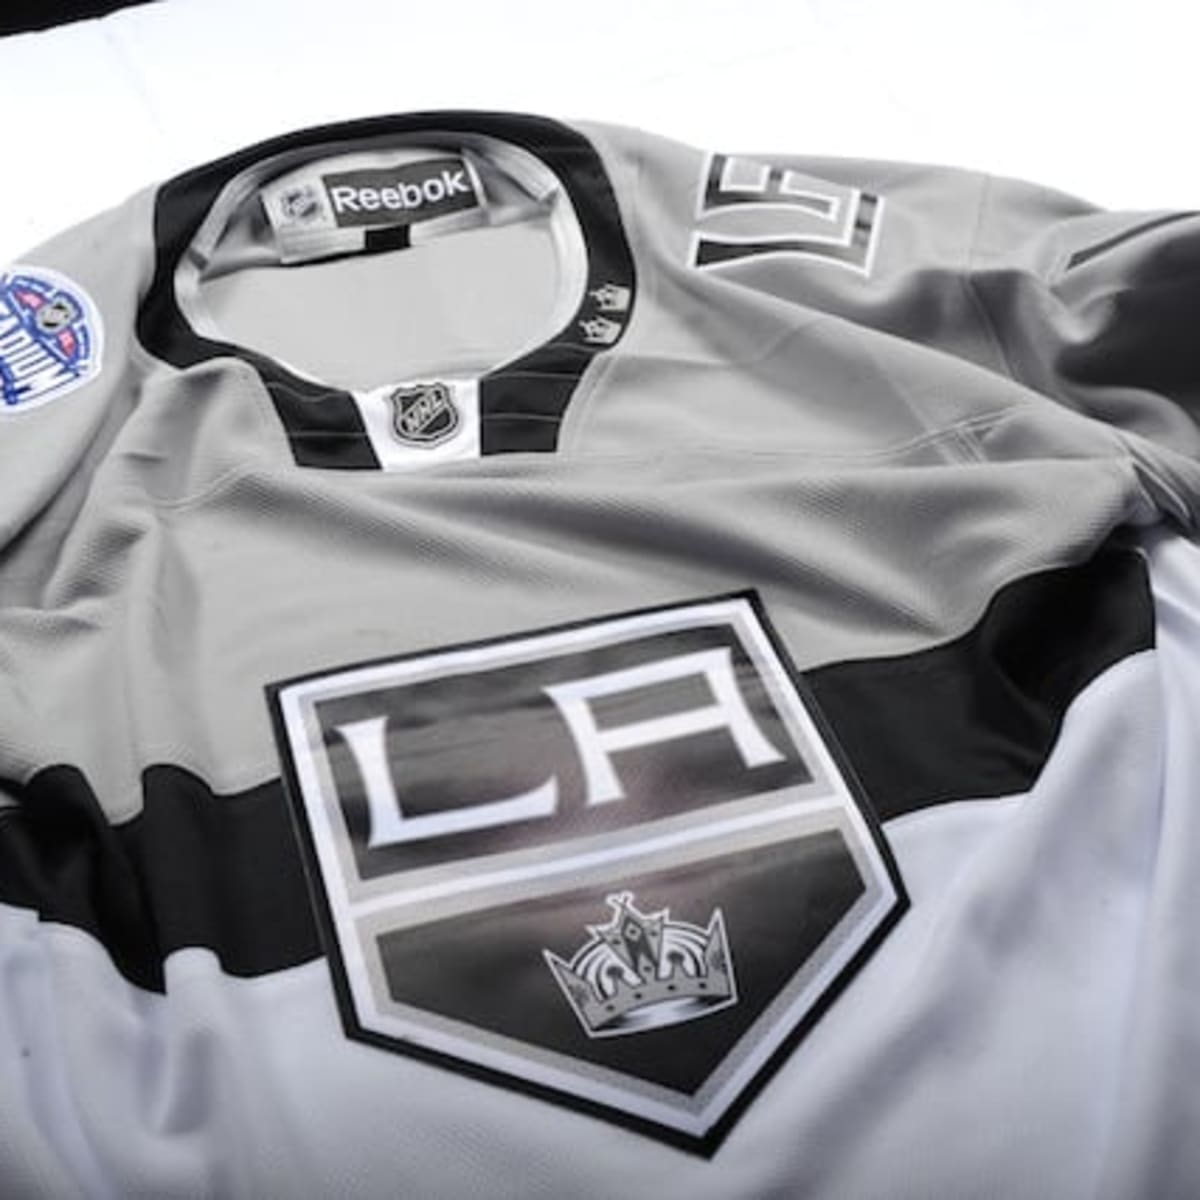 Behind the Scenes: Creation of the LA Kings 2020 Outdoor Jersey